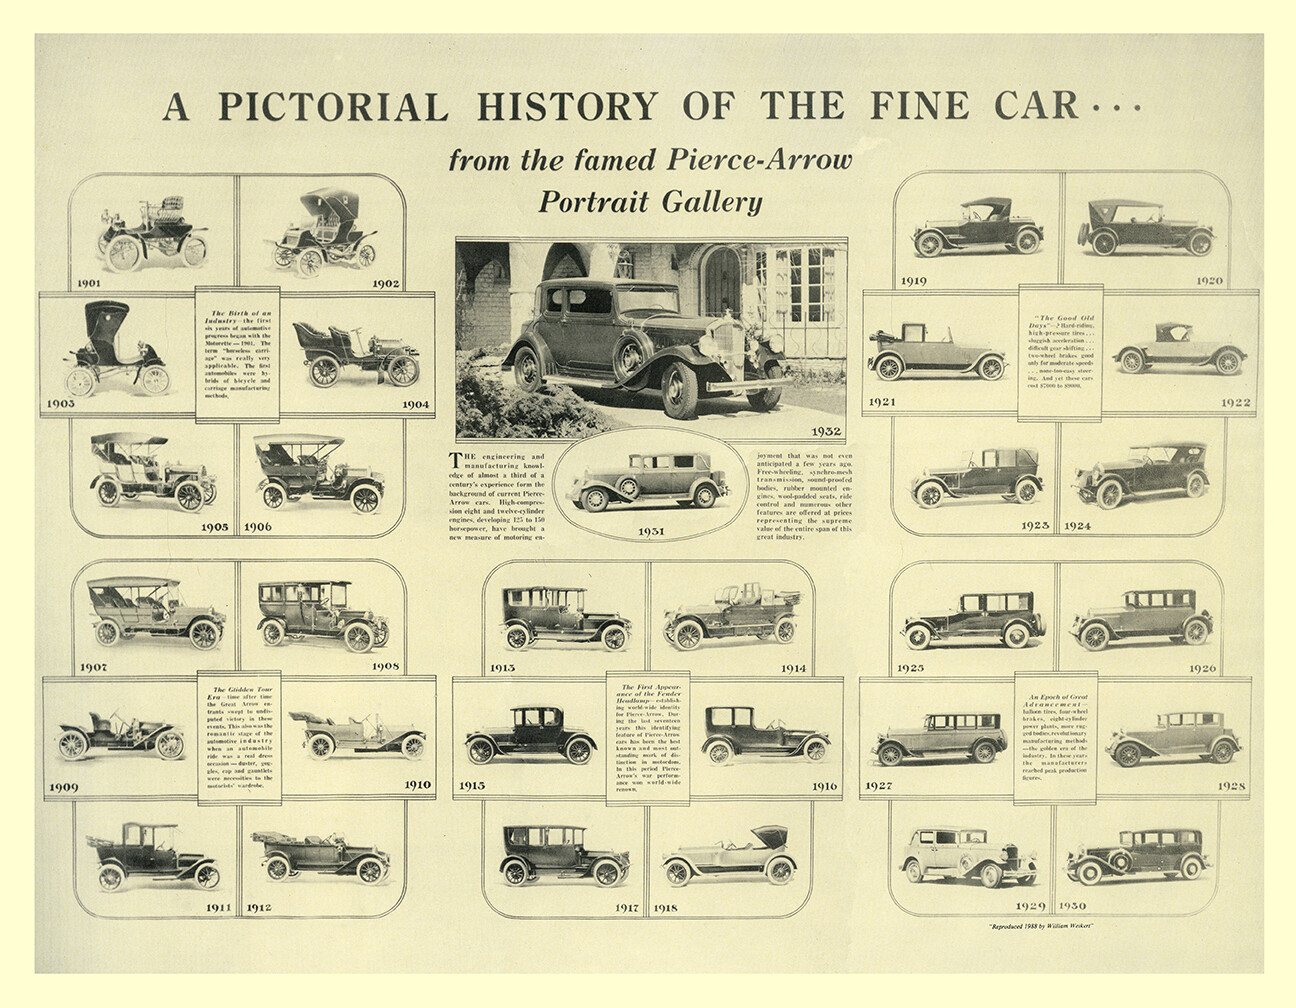 Pictorial History of the Fine Car